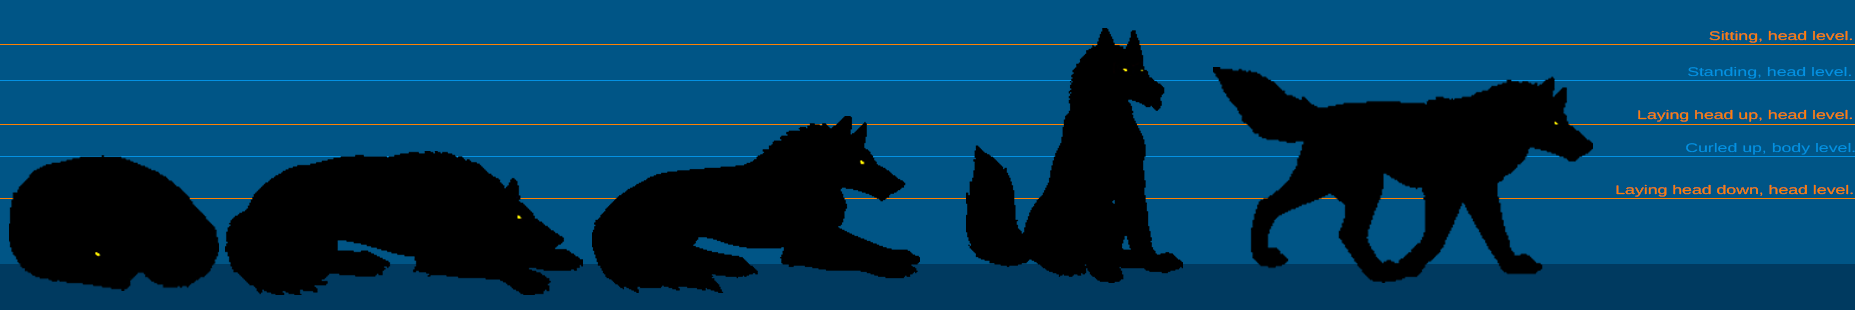 Pose sizing chart. Size_chart_dire_or_larger_canines_by_fezsinner-dbts28o